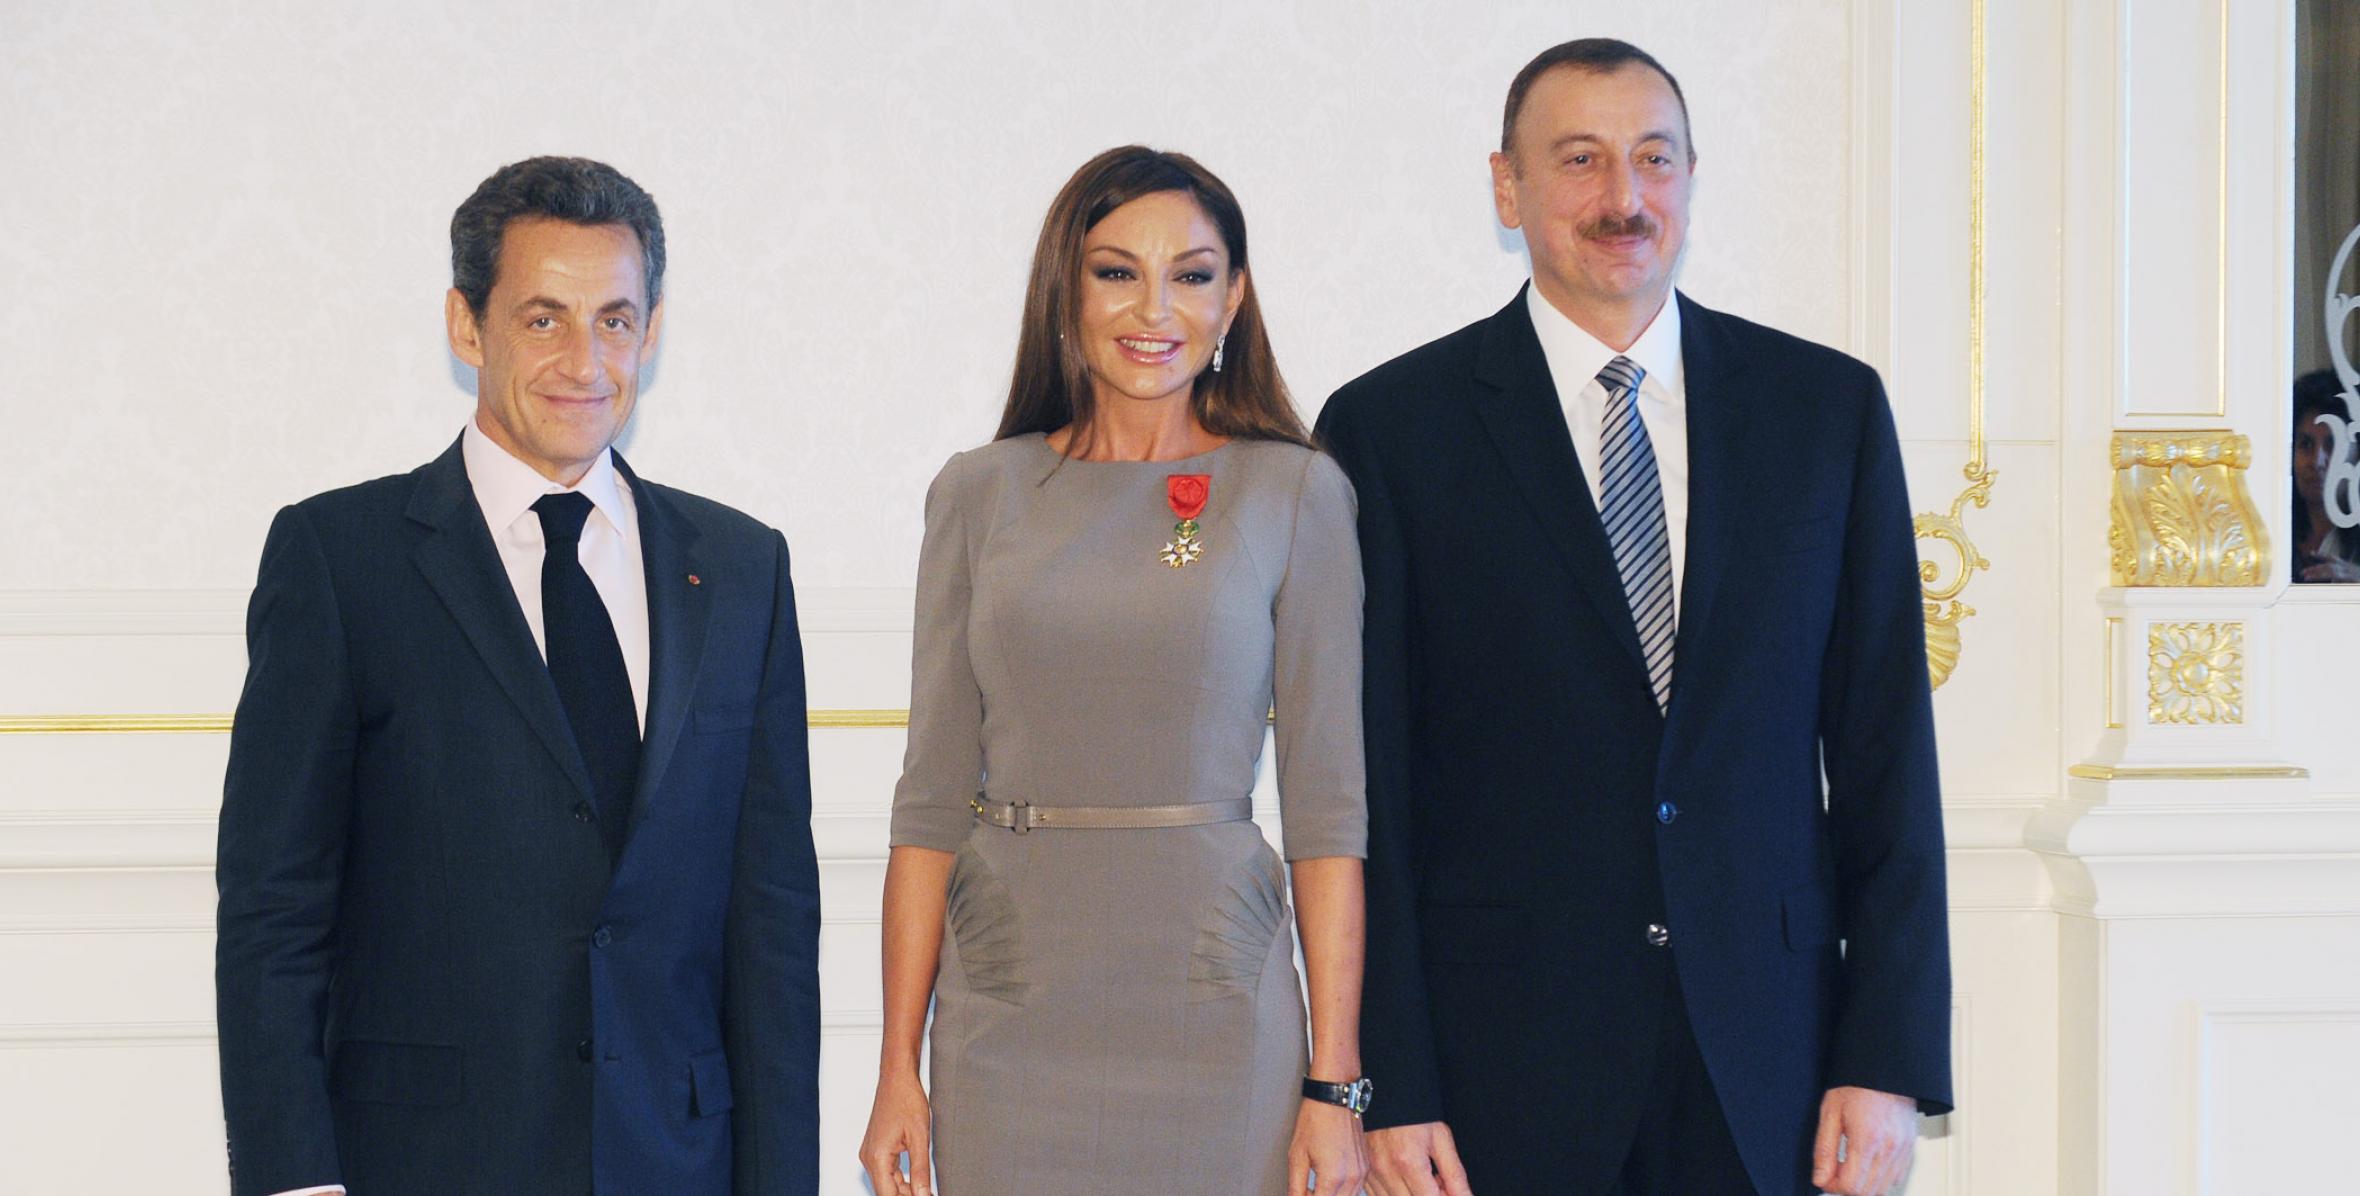 A ceremony to award Mehriban Aliyeva with the Order of the French Legion of Honor Officer was held